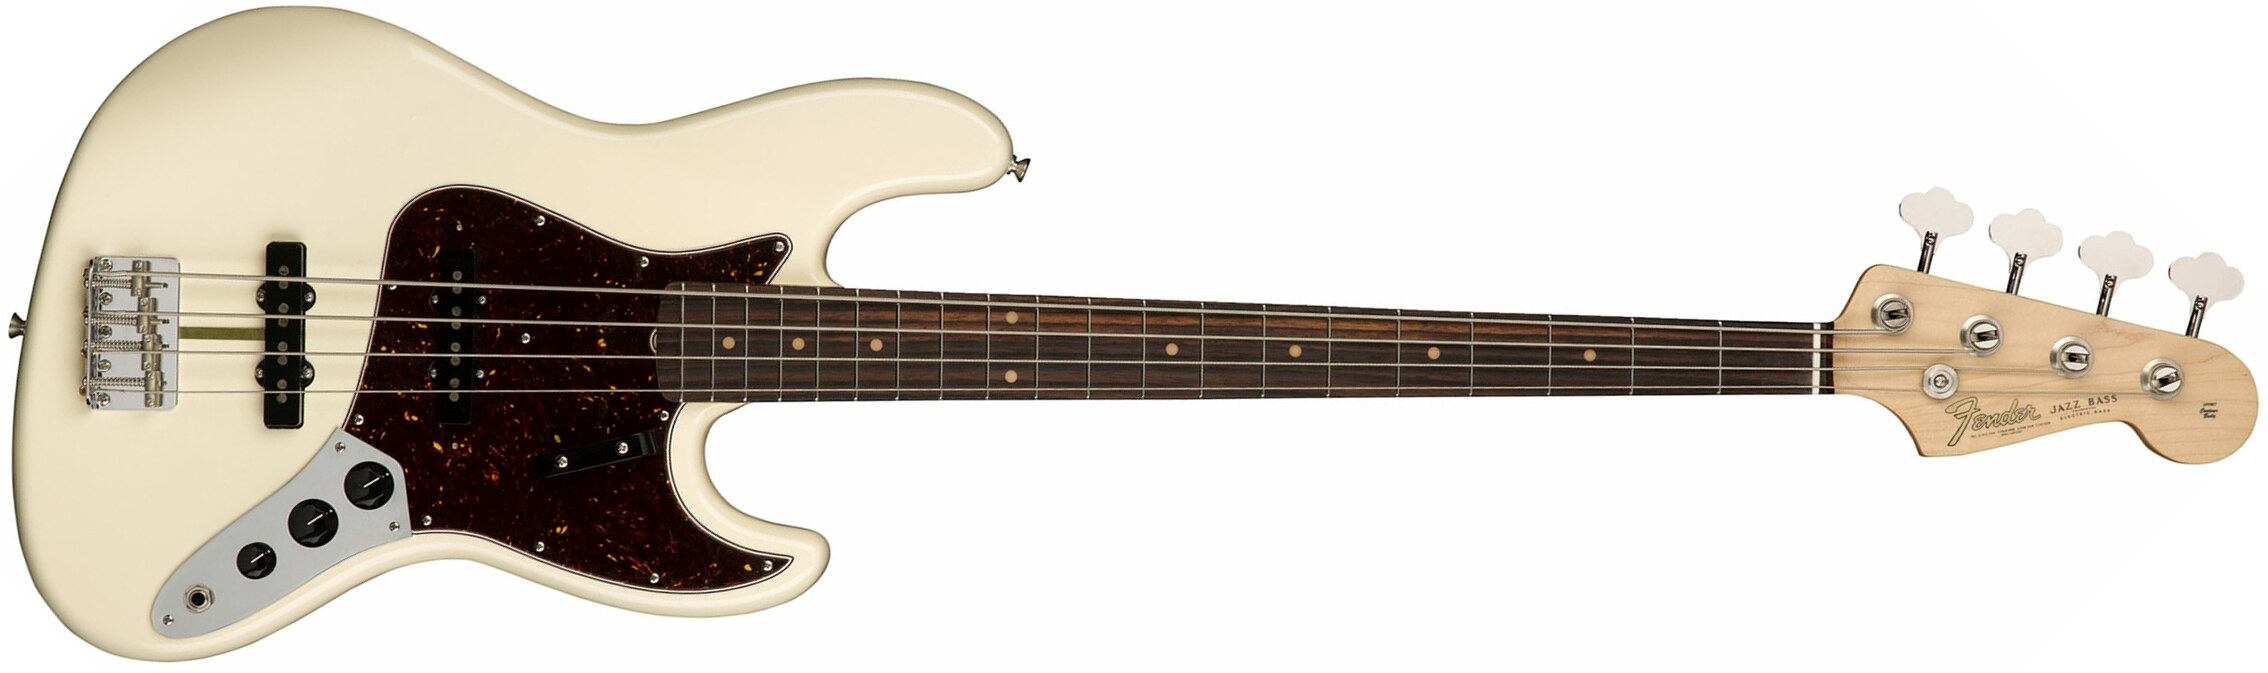 Fender Jazz Bass '60s American Original Usa Rw - Olympic White - Solid body electric bass - Main picture